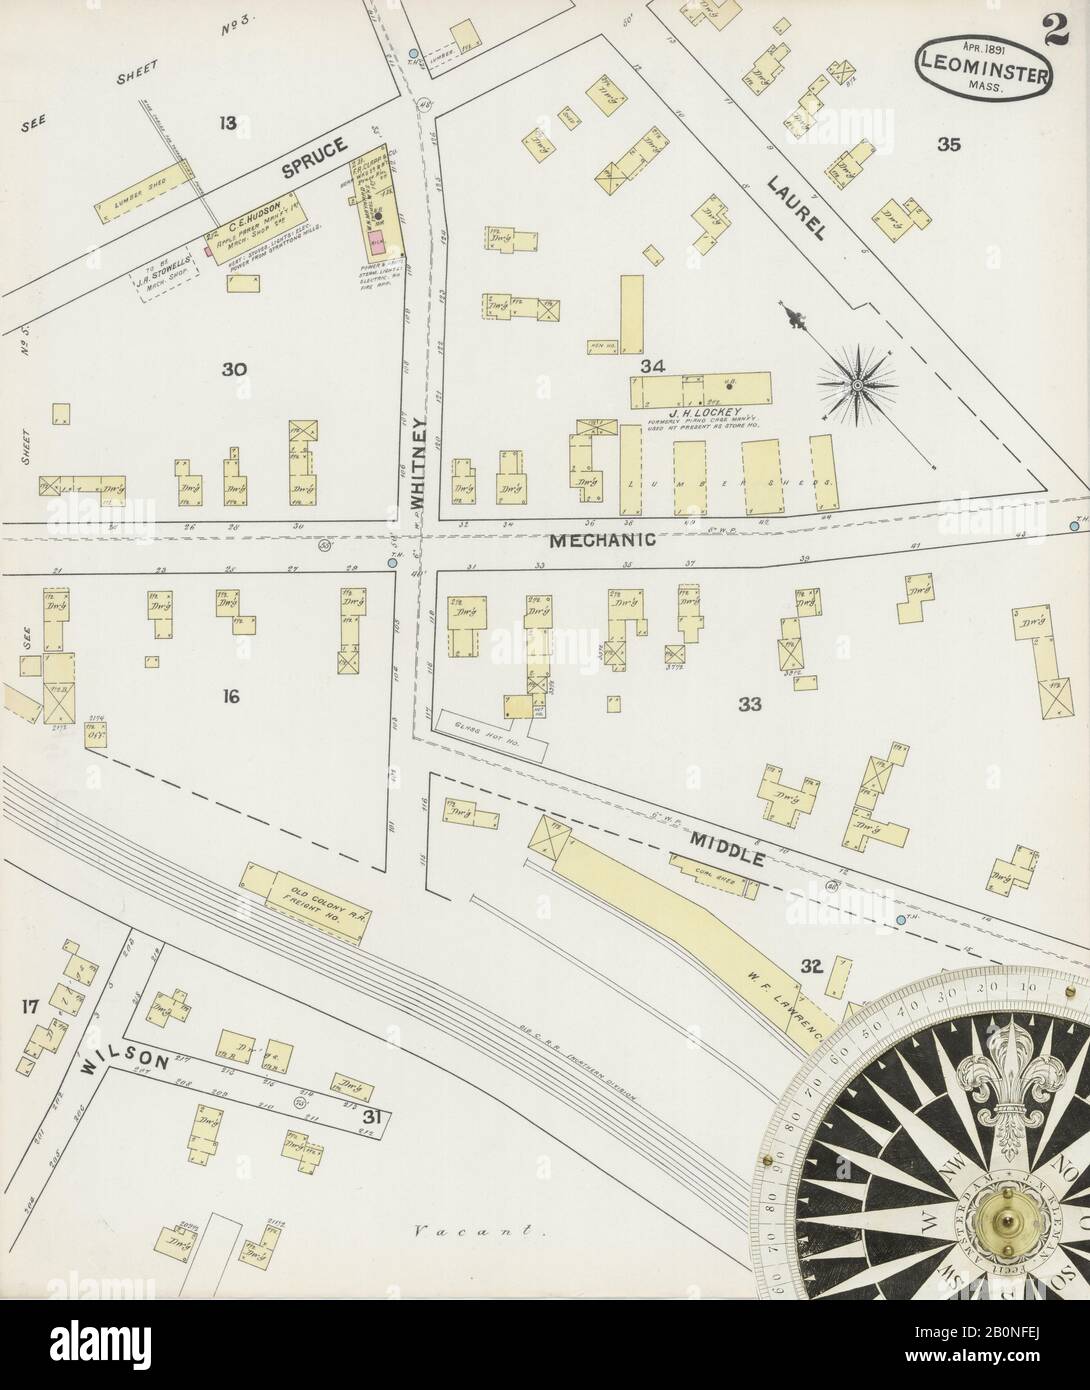 Image 2 of Sanborn Fire Insurance Map from Leominster, Worcester County, Massachusetts. Apr 1891. 10 Sheet(s), America, street map with a Nineteenth Century compass Stock Photo